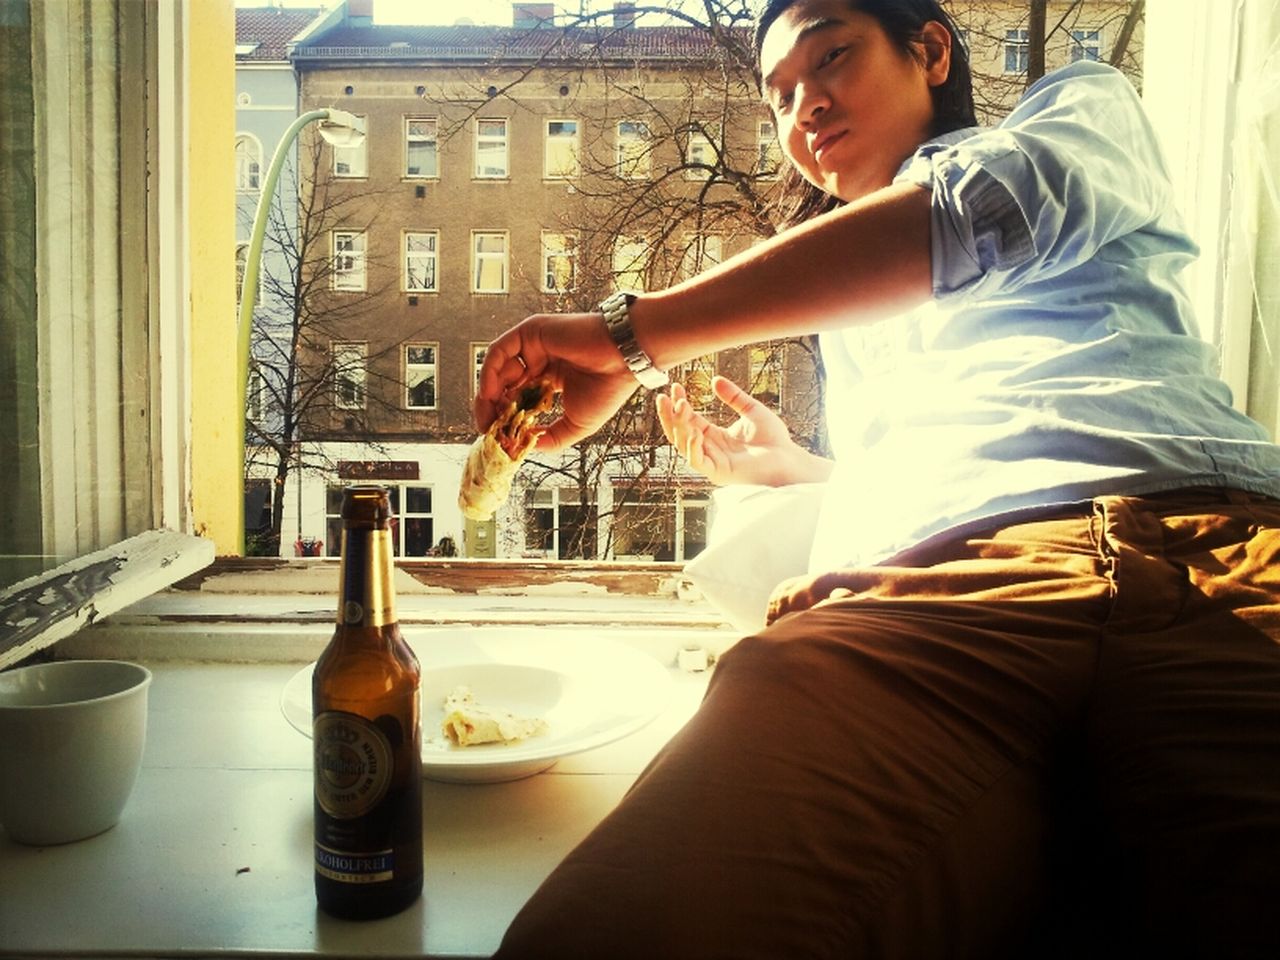 Portrait of man sitting on window sill and holding food by beer bottle